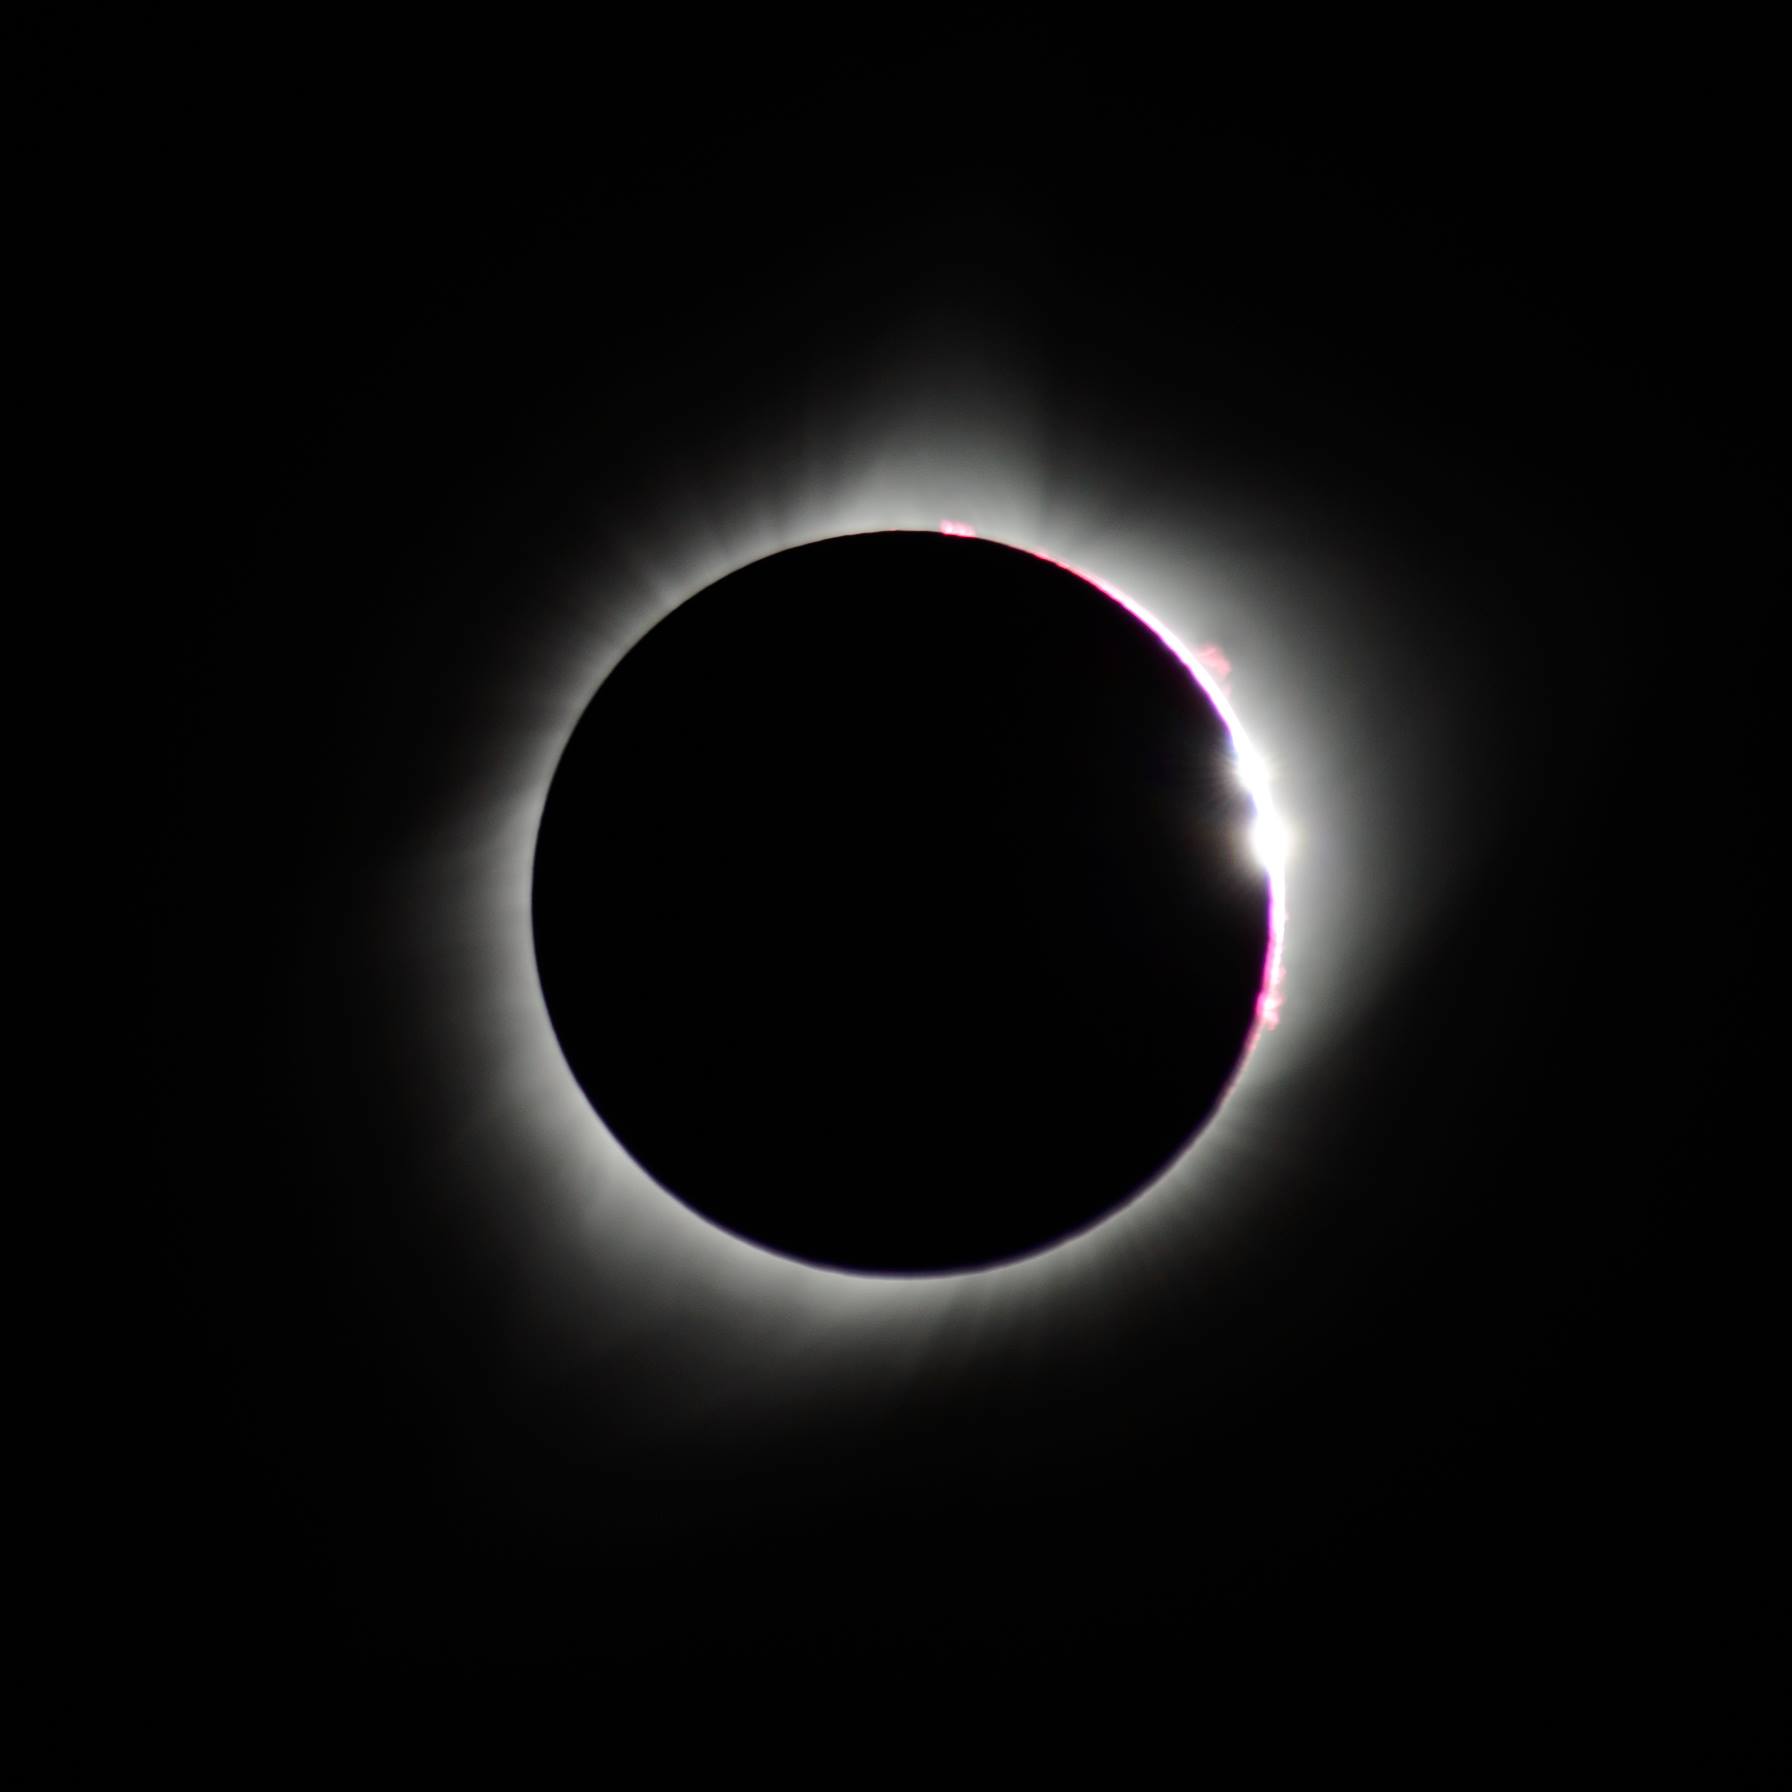 Eclipse Photos from Guernsey State Park in Guernsey, Wyoming